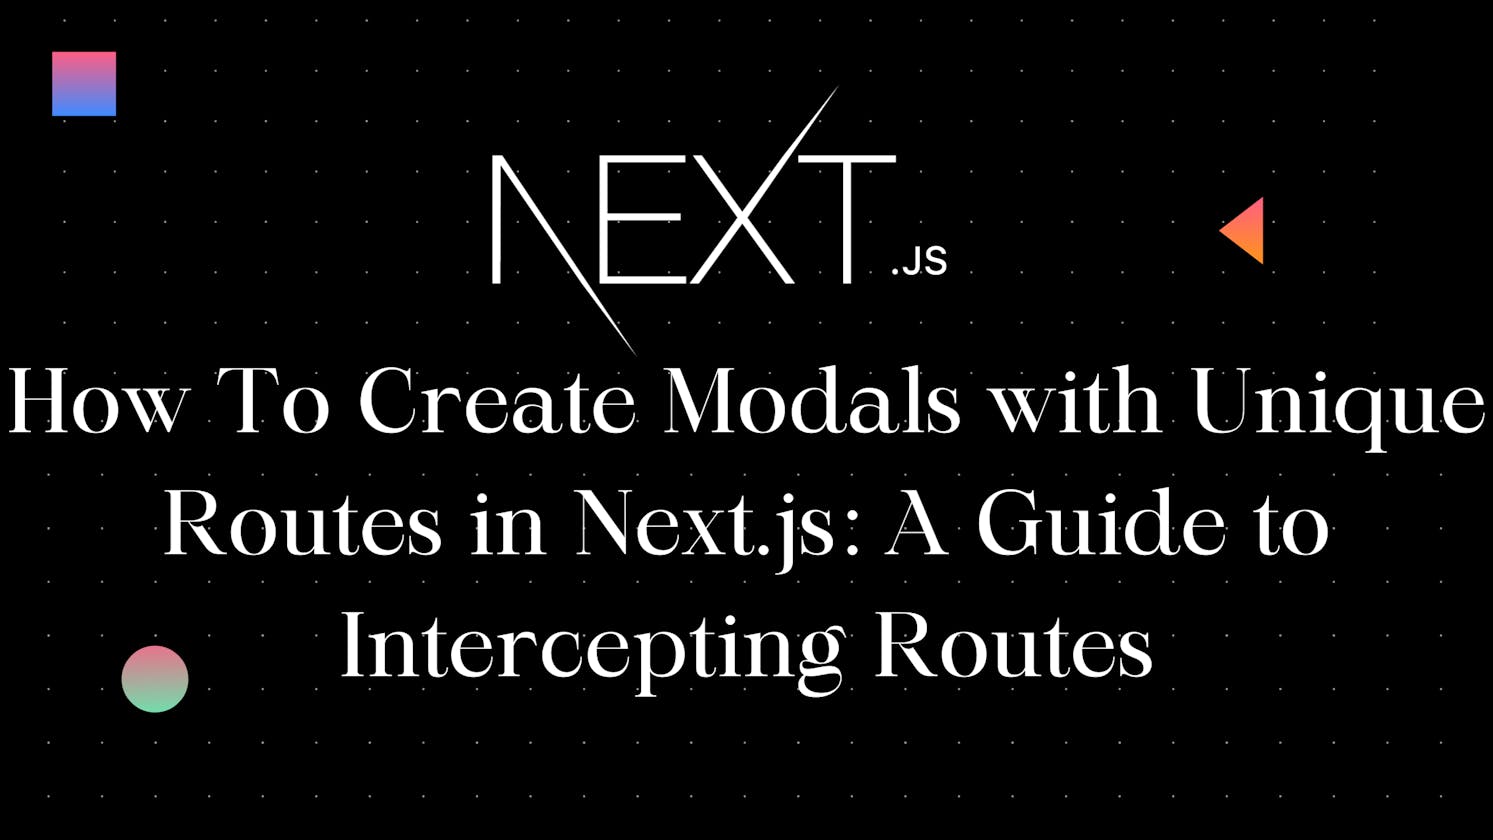 How To Create Modals with Unique Routes in Next.js: A Guide to Intercepting Routes